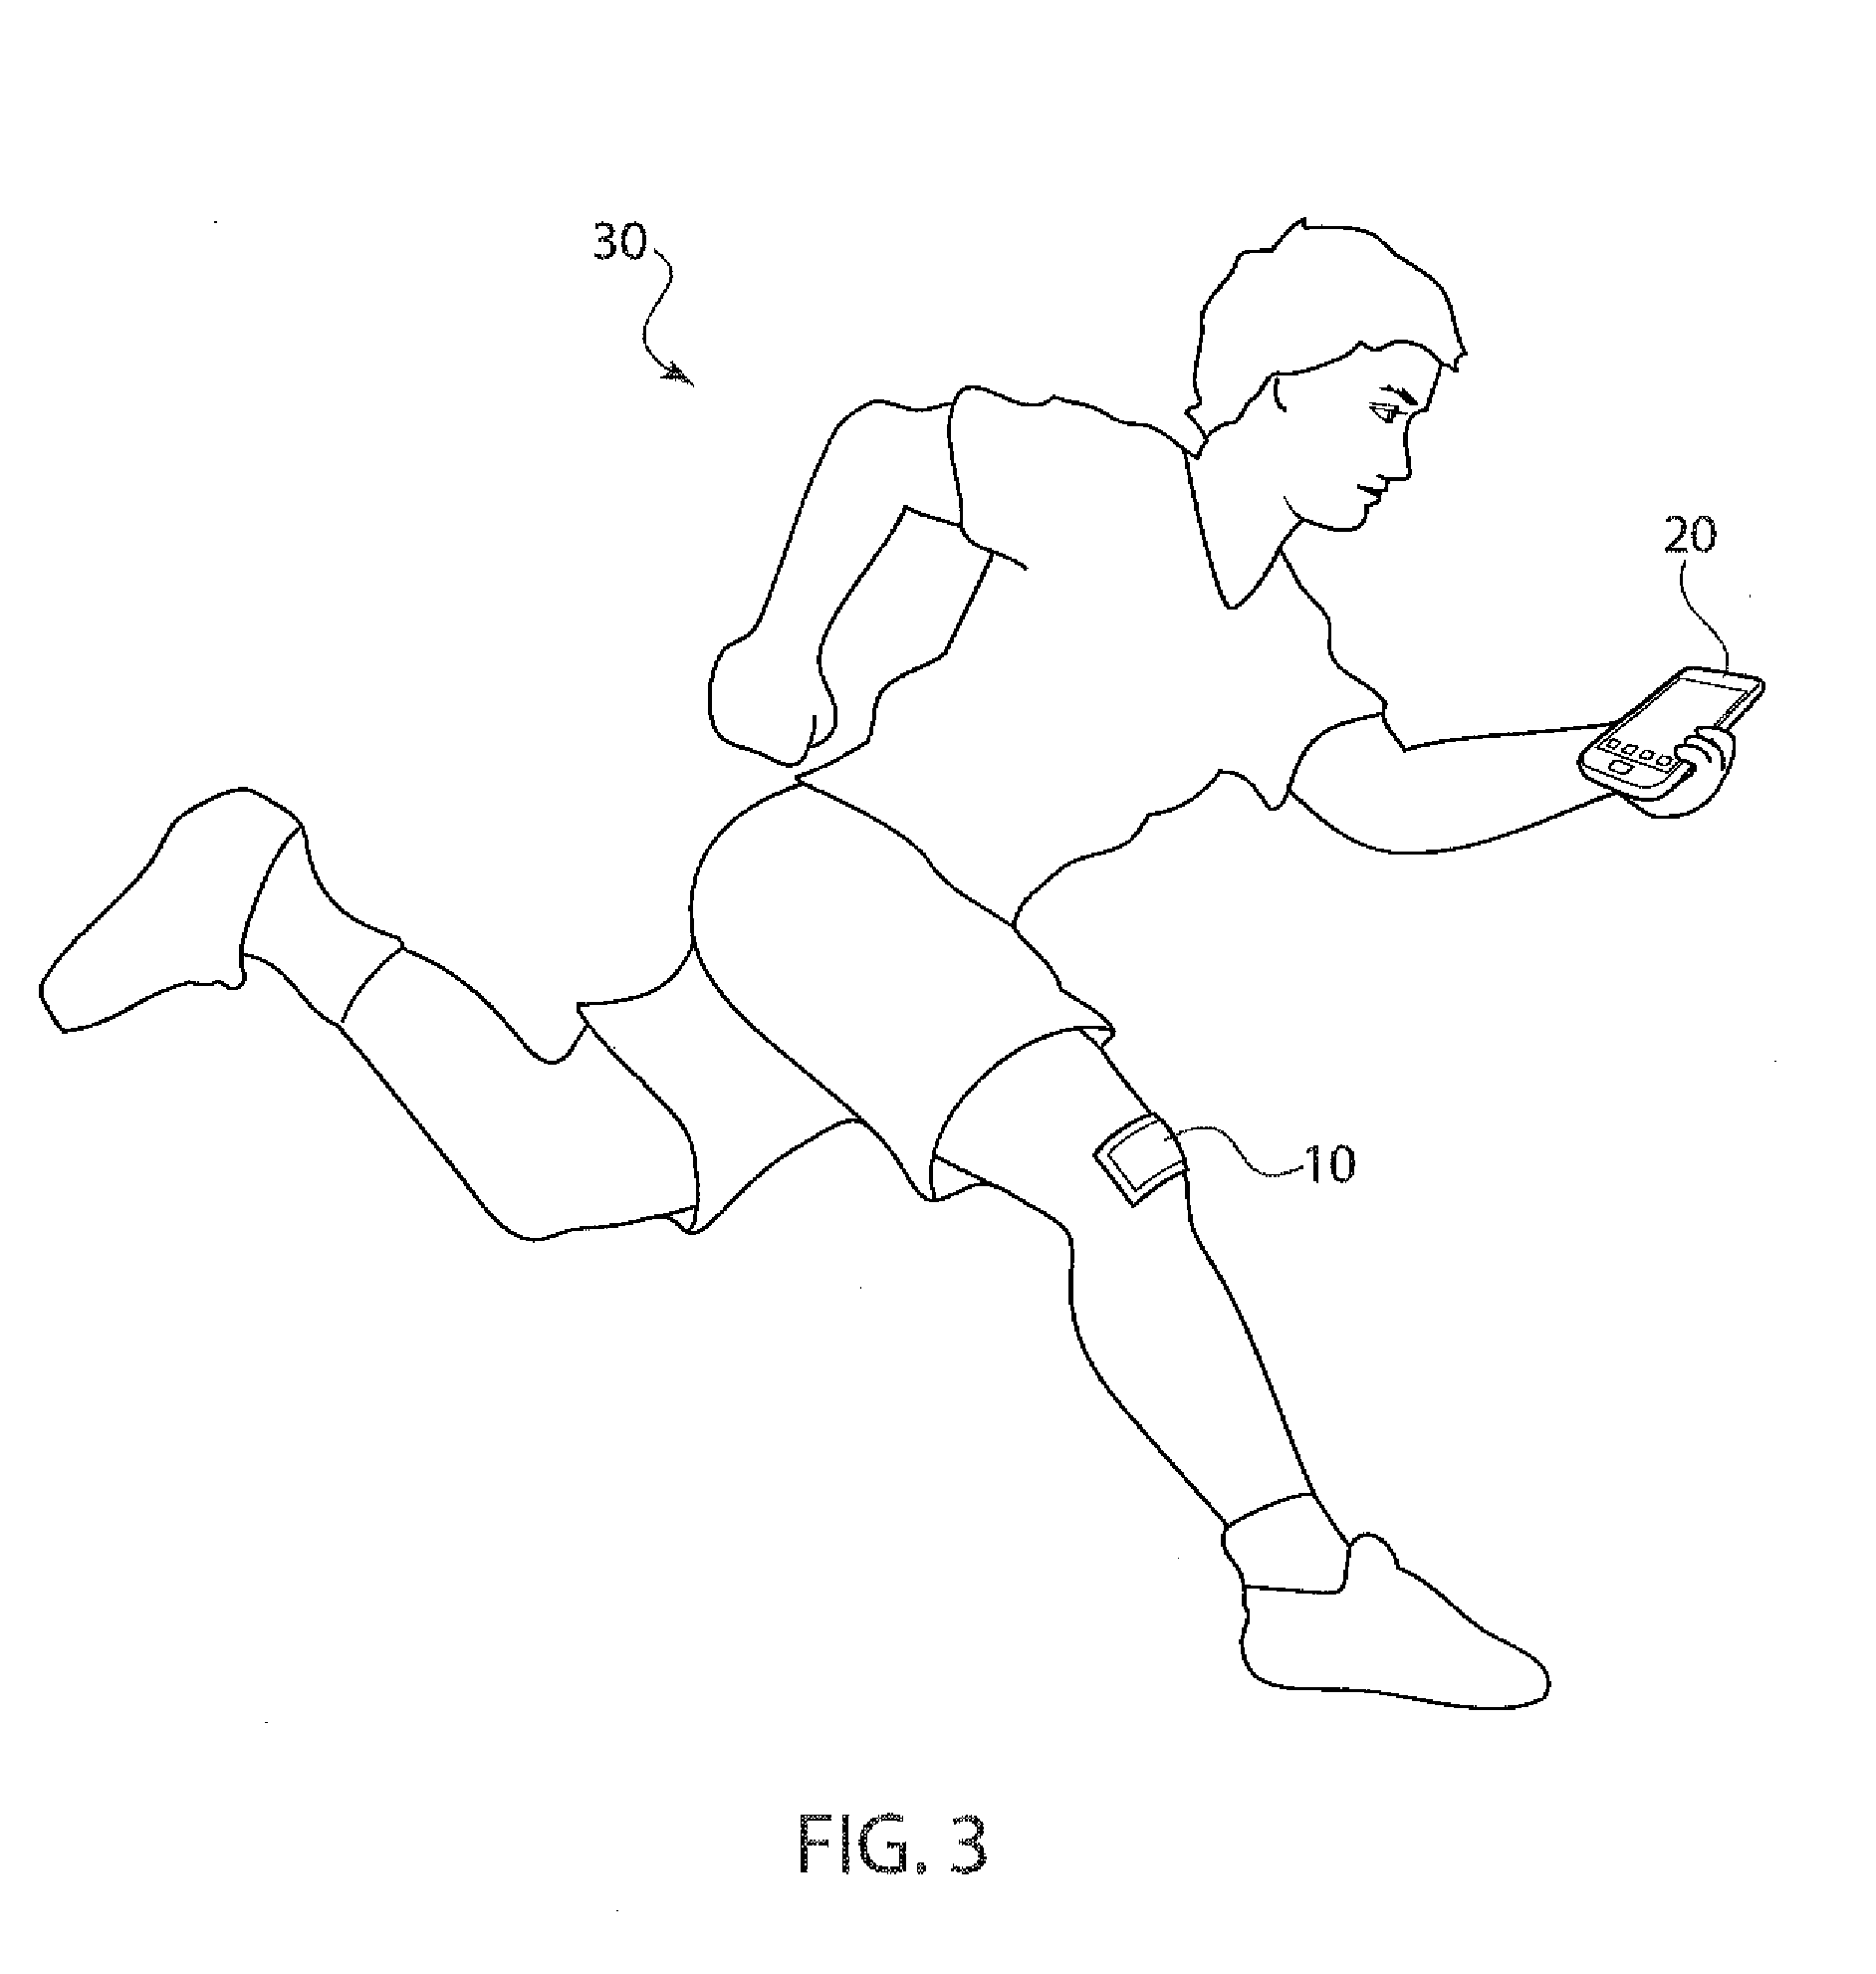 Self-contained adhesive patch for electrical stimulation for pain relief and muscle fatigue